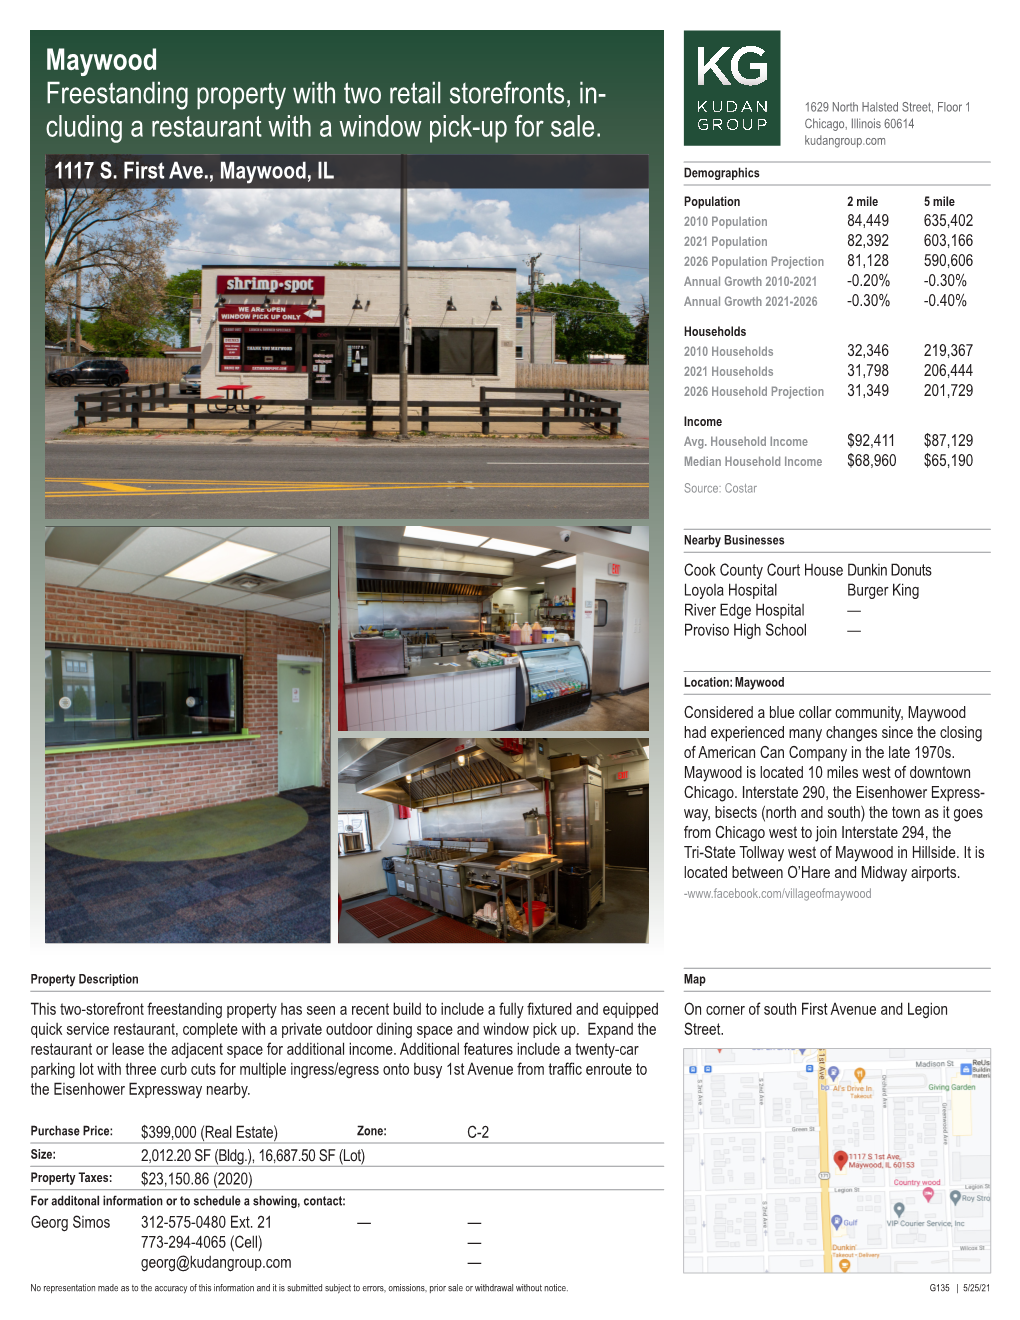 Maywood Freestanding Property with Two Retail Storefronts, In